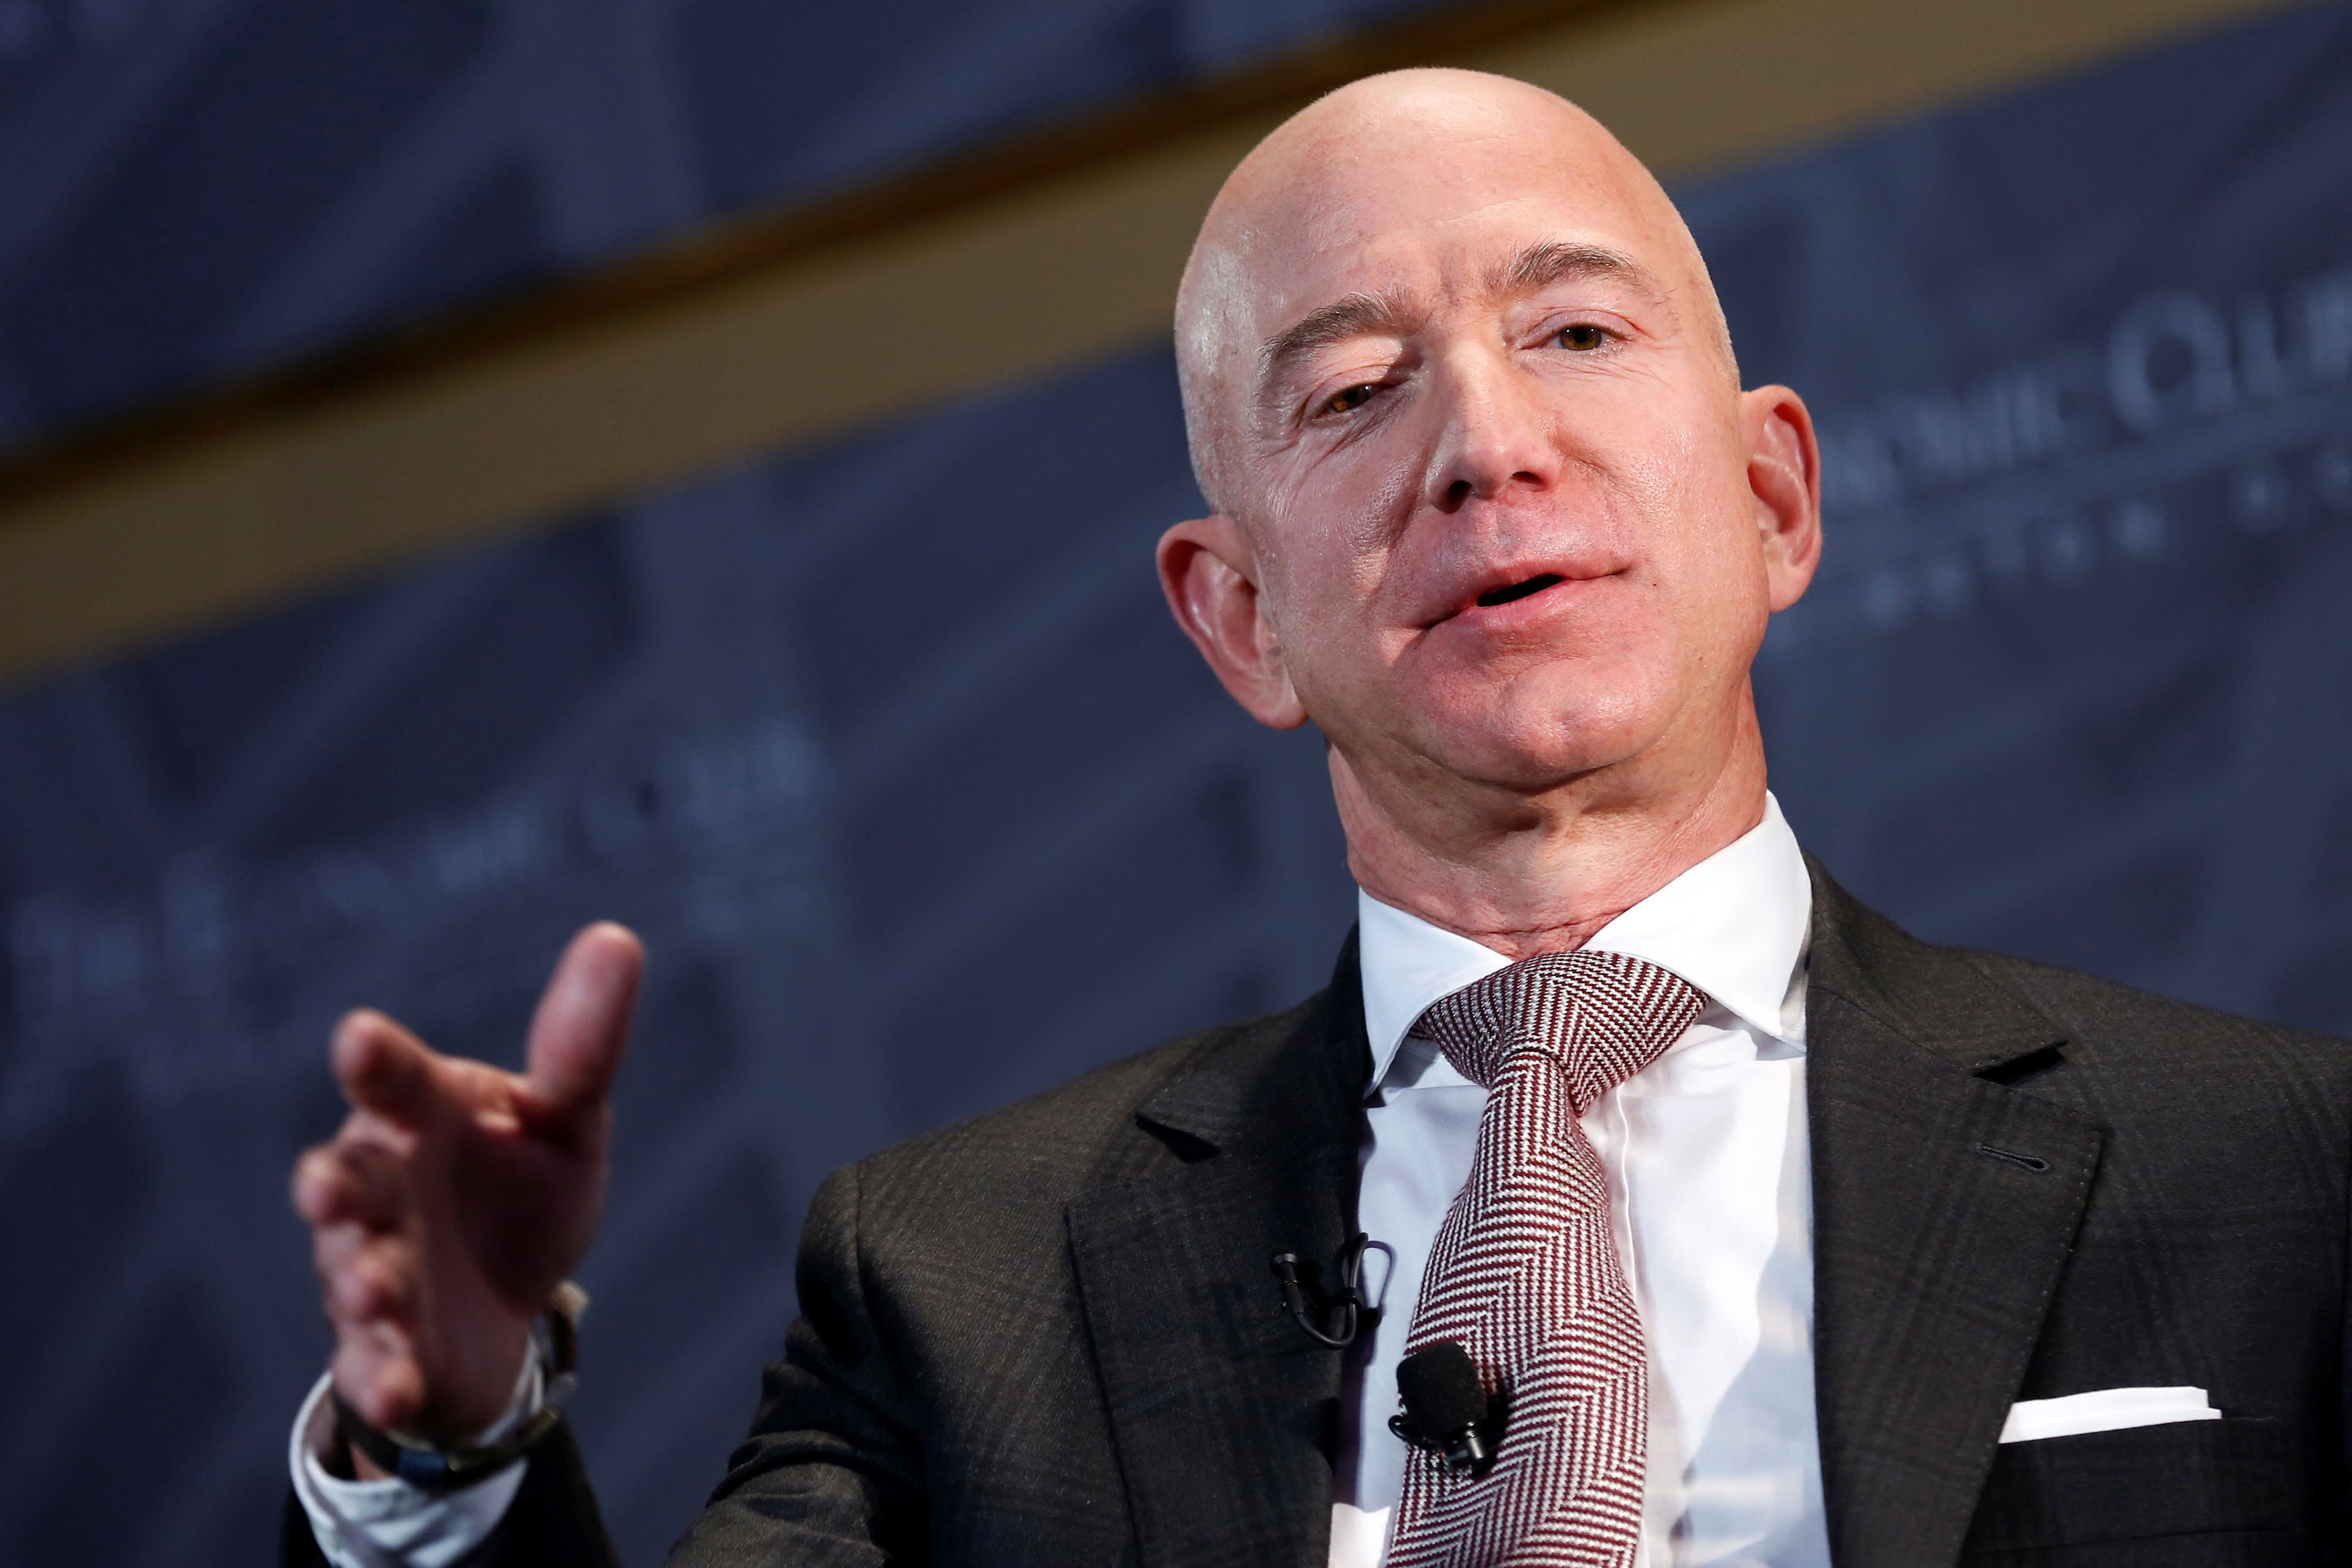 Amazon is aggressively blocking ads for unprofitable products as part of a plan to bolster its bottom line